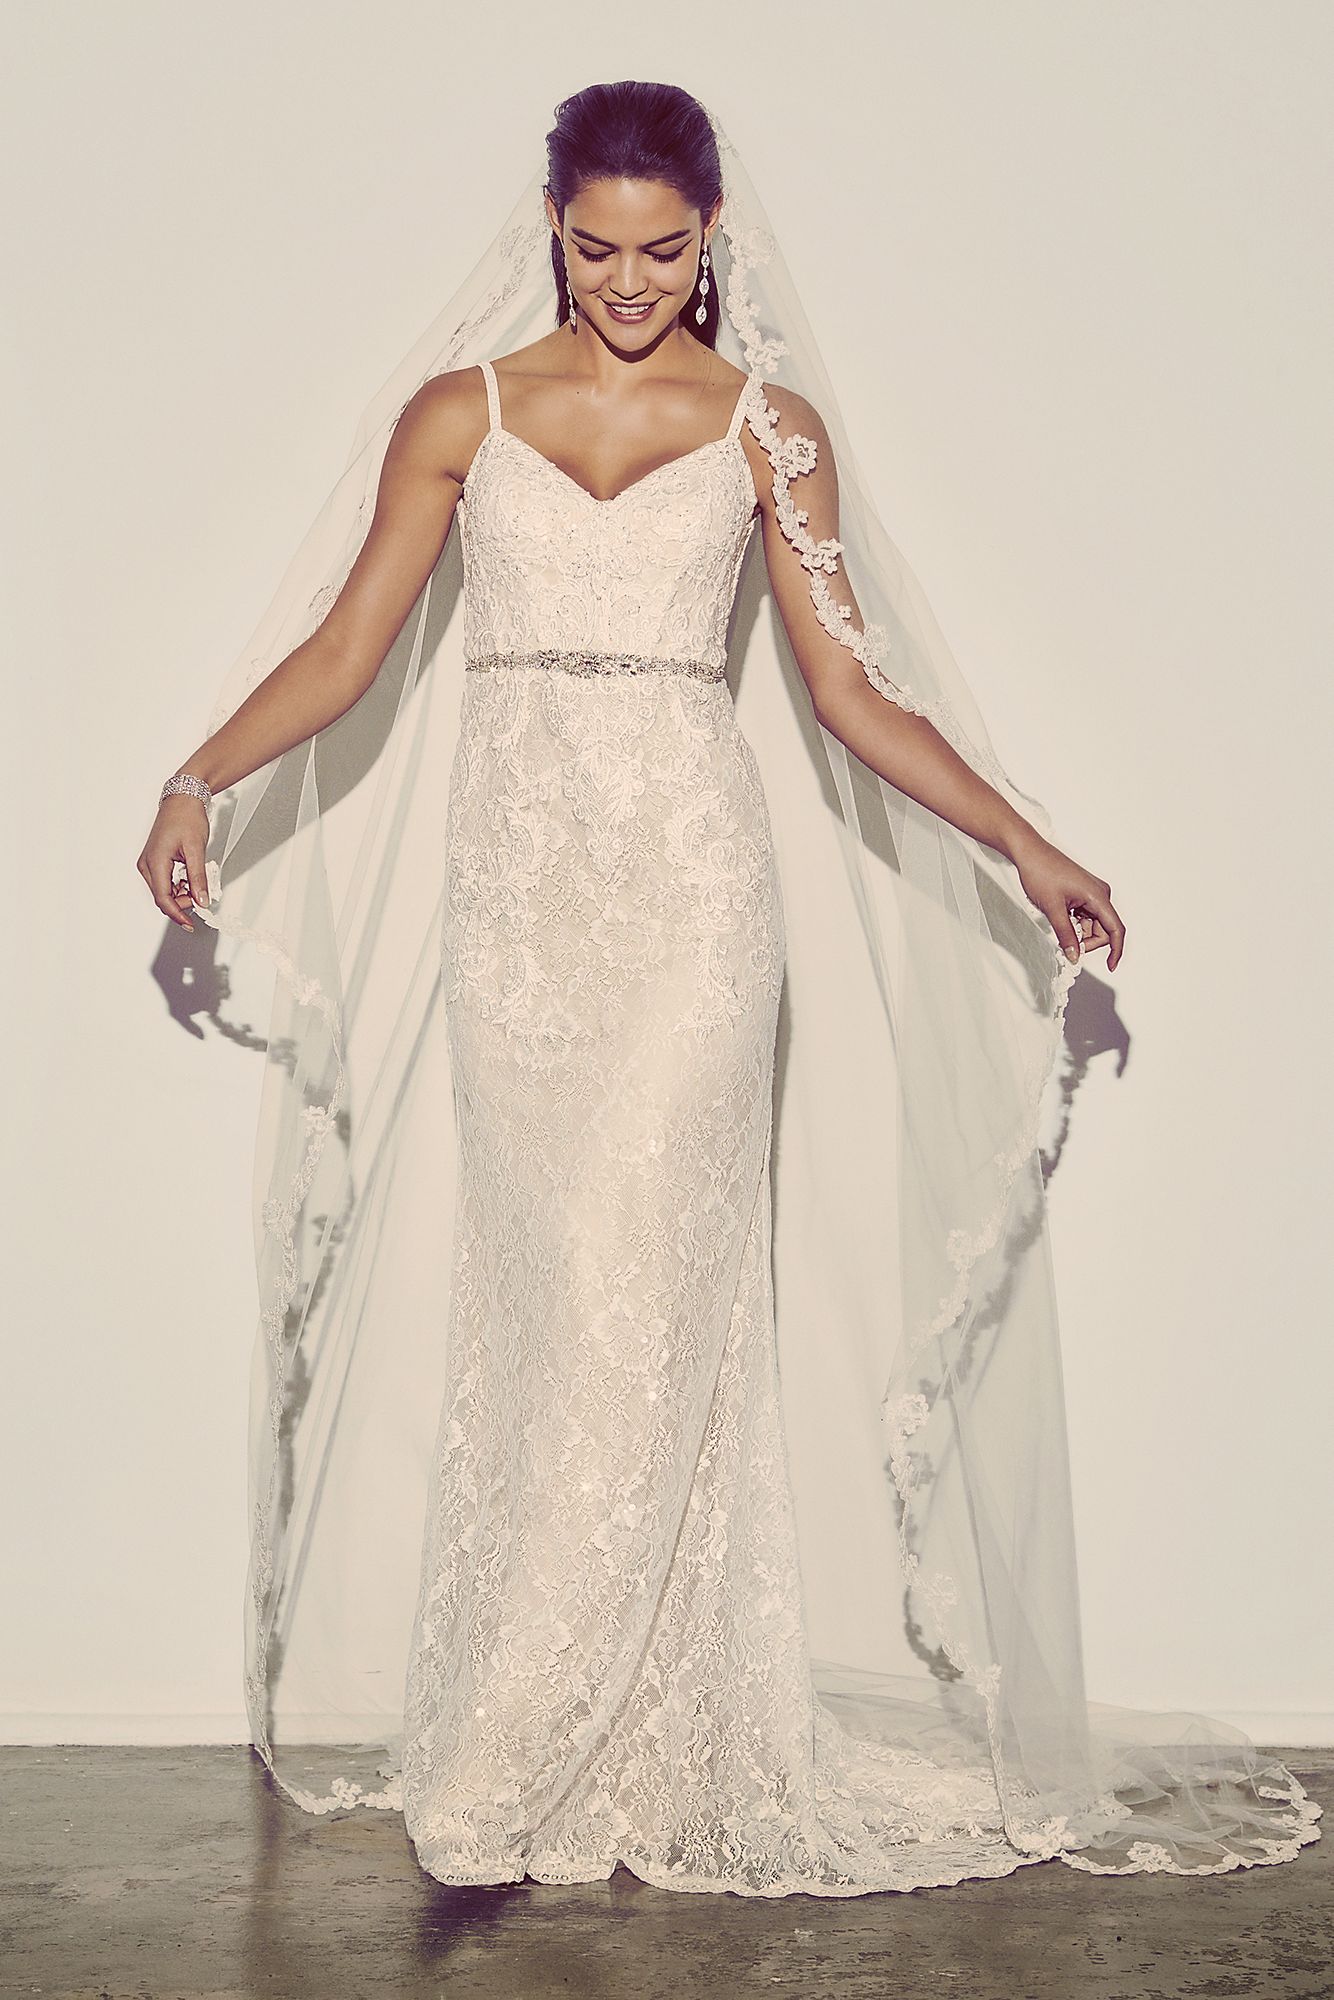 Sequin Lace Petite Wedding Dress with Crystal Belt  7SWG819